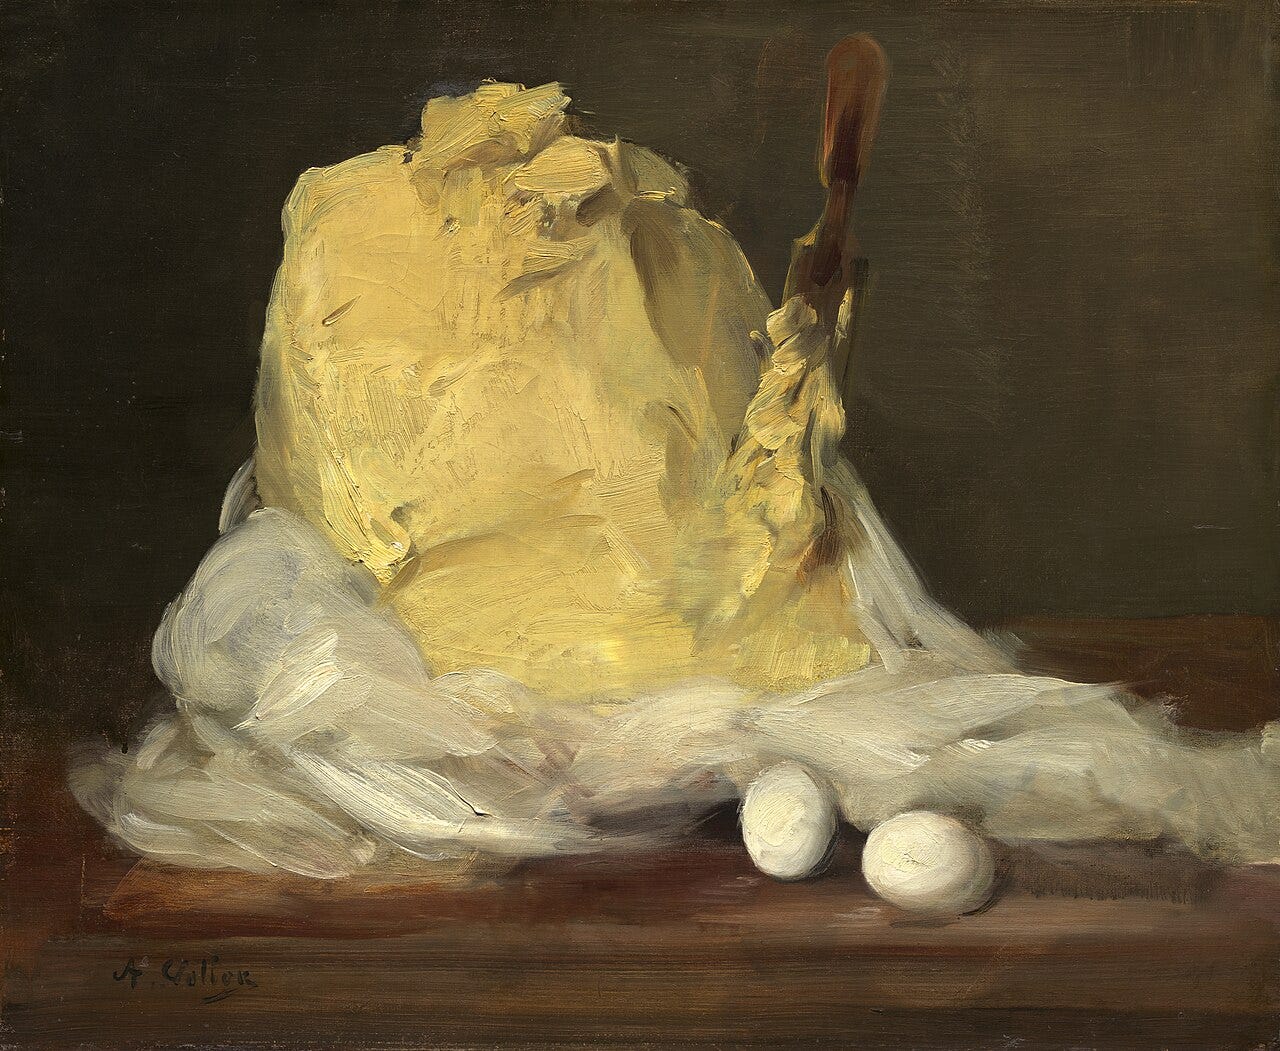 Two Poems About Butter